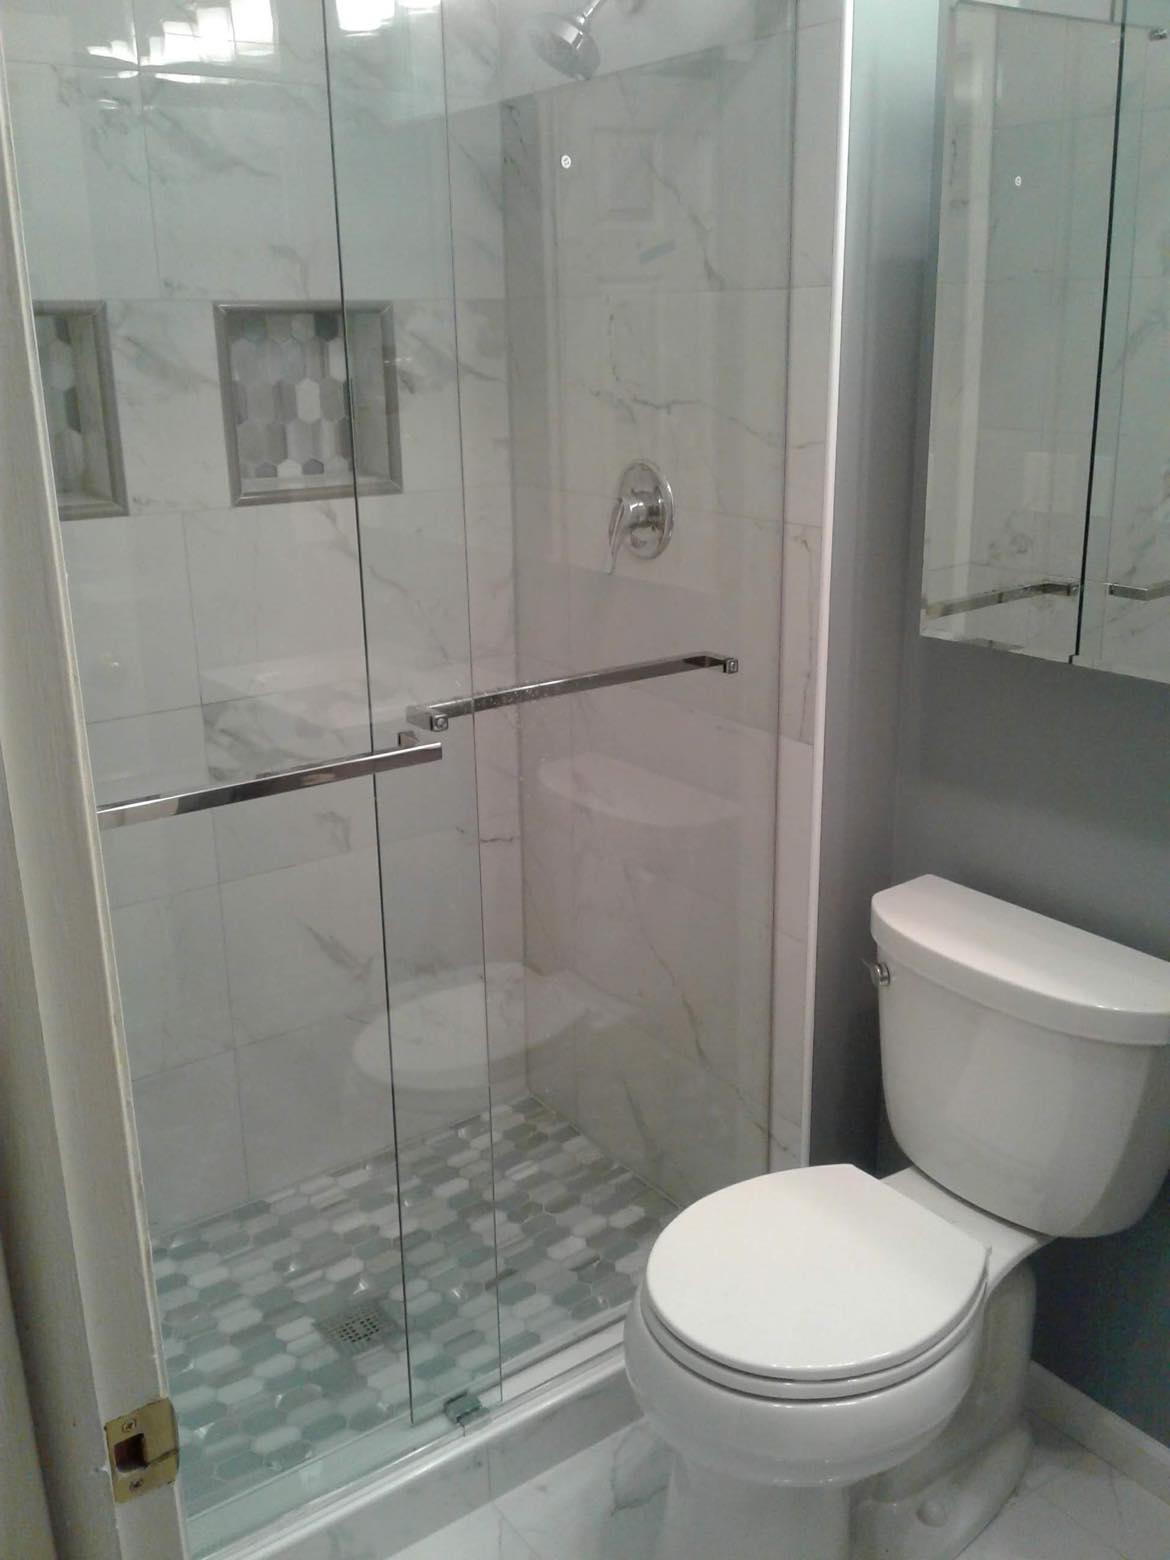 Standing shower stall remodeling with glass shower doors,  pattern floor and wall tiling, new toilet, and granite quartz tiling floors.